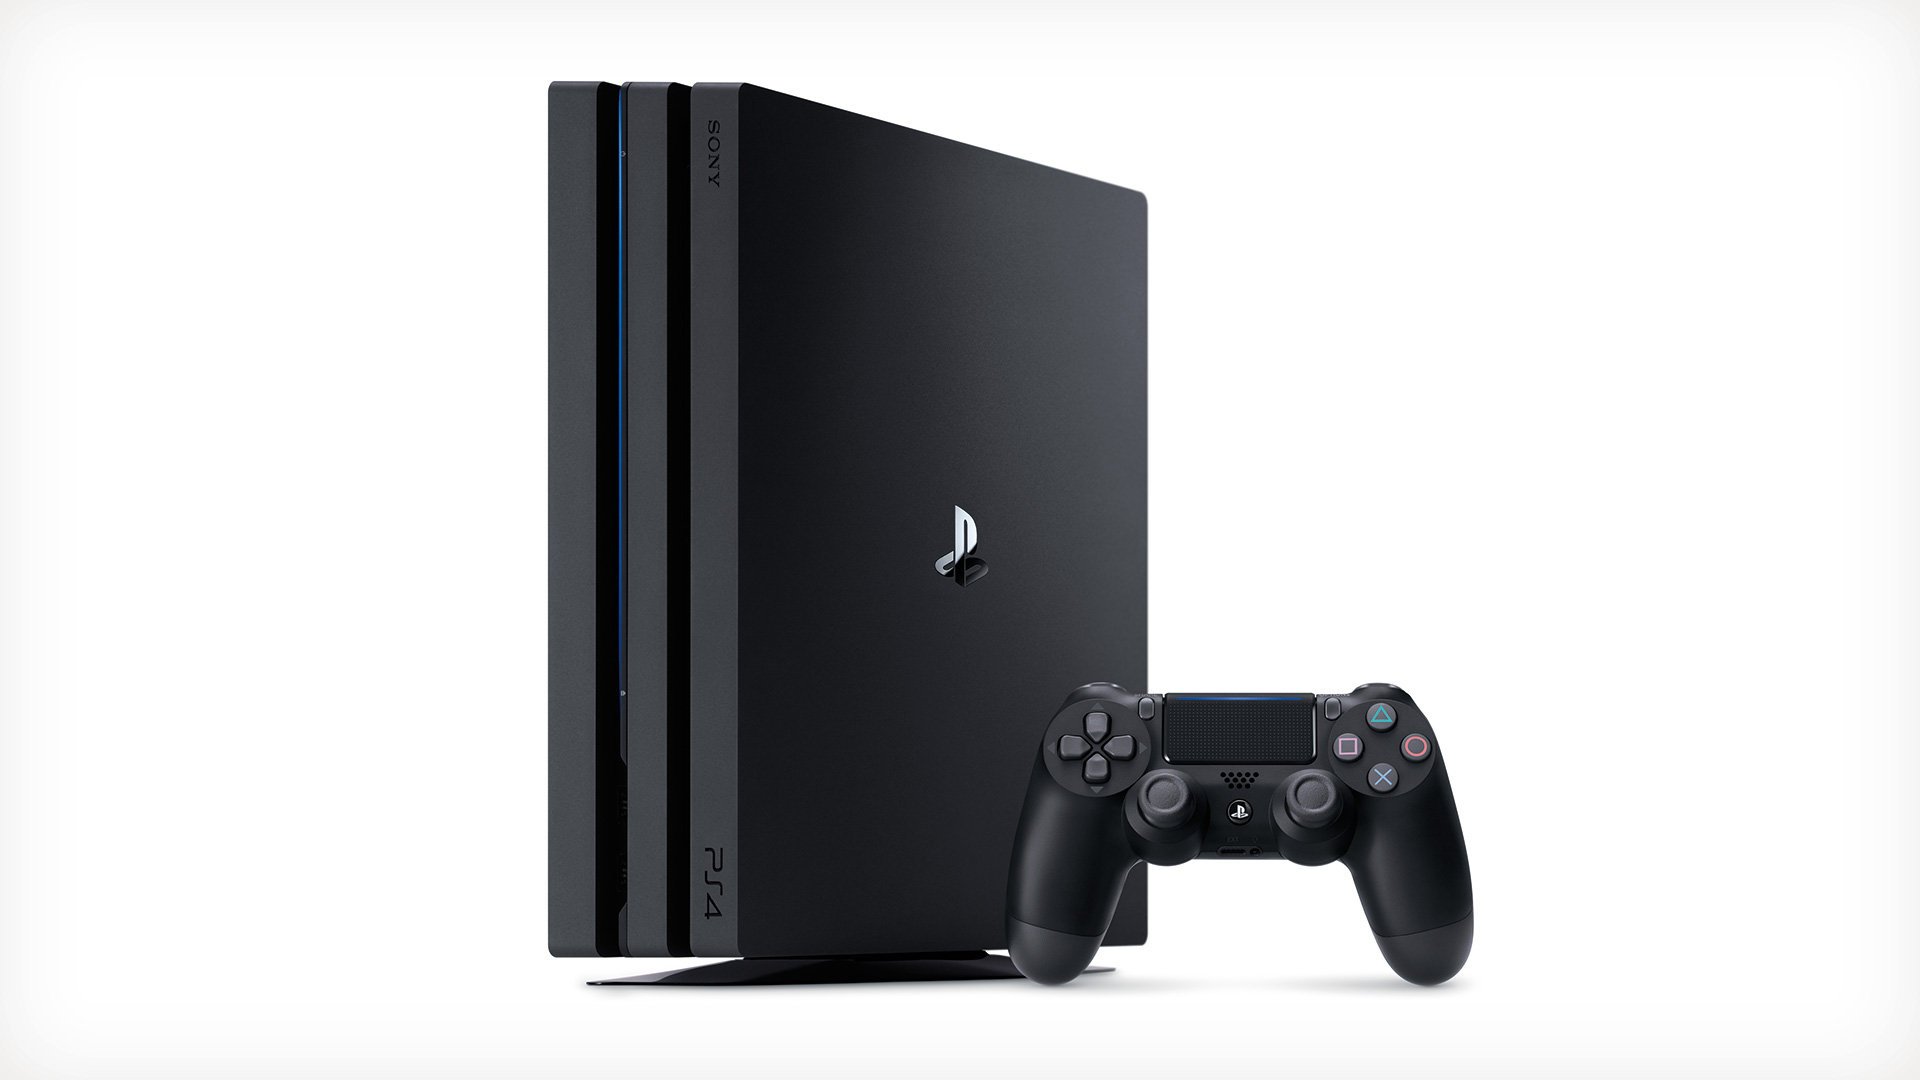 PlayStation Releases PS4 Pro Teardown The Fan Without Voiding Your Warranty | Attack of the Fanboy